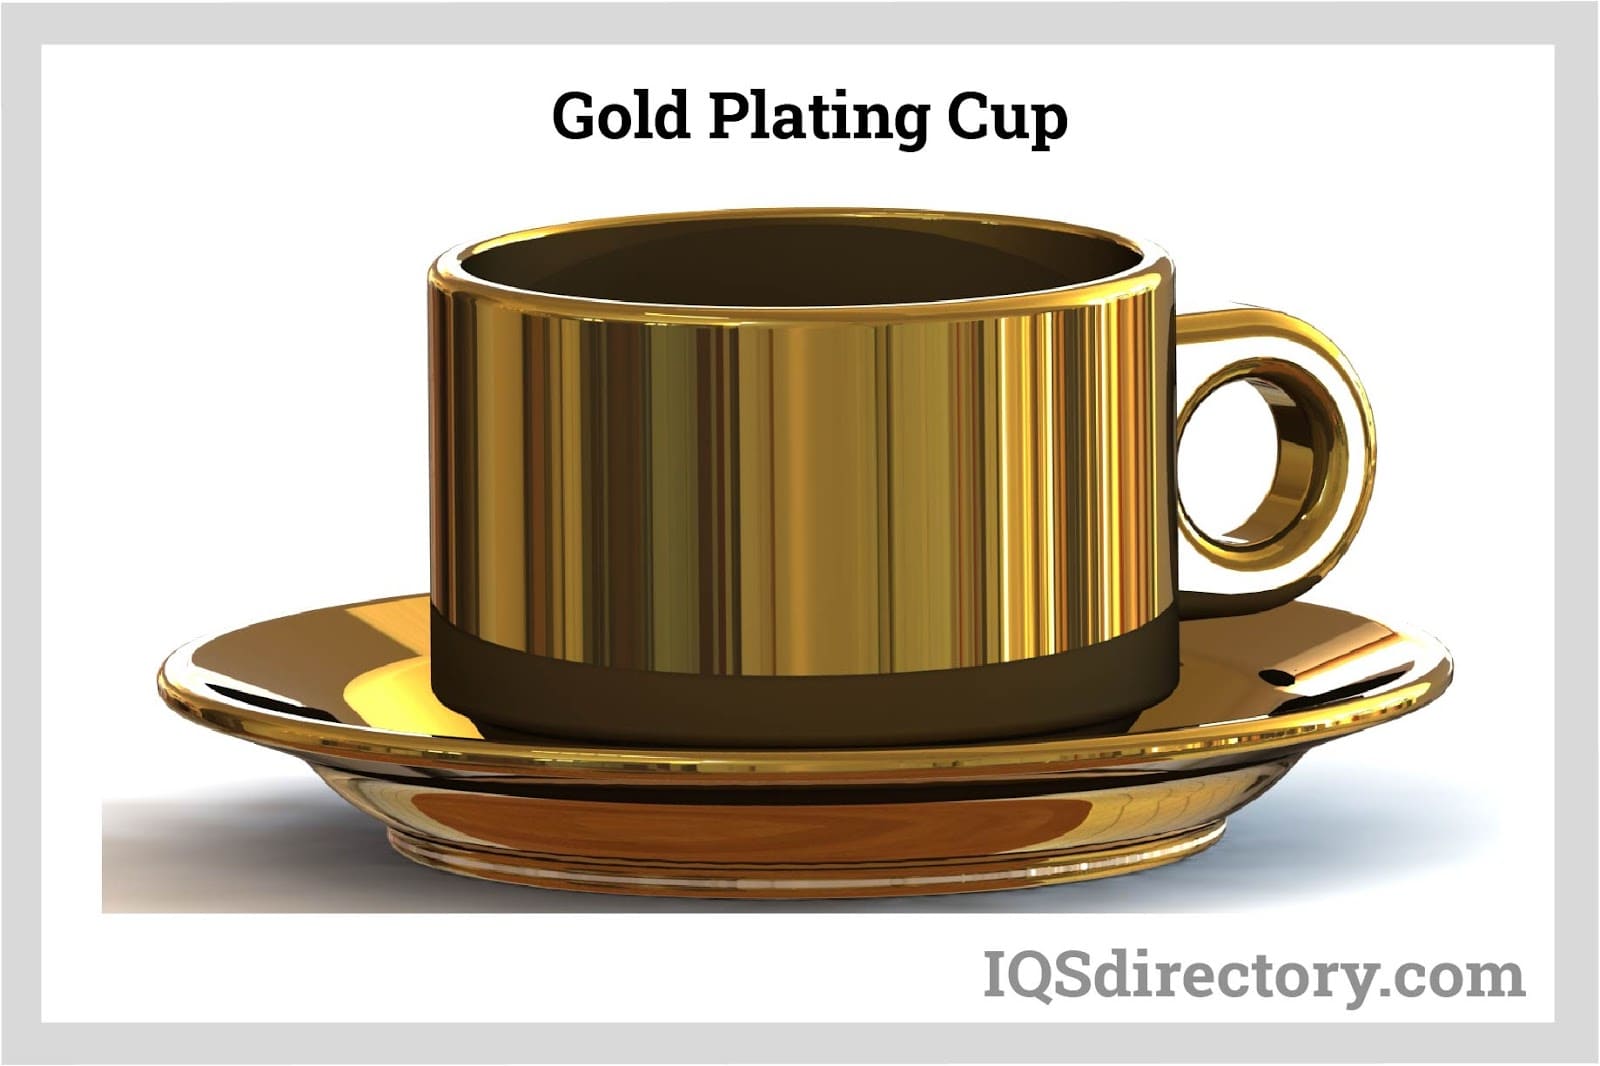 Gold Plating Cup